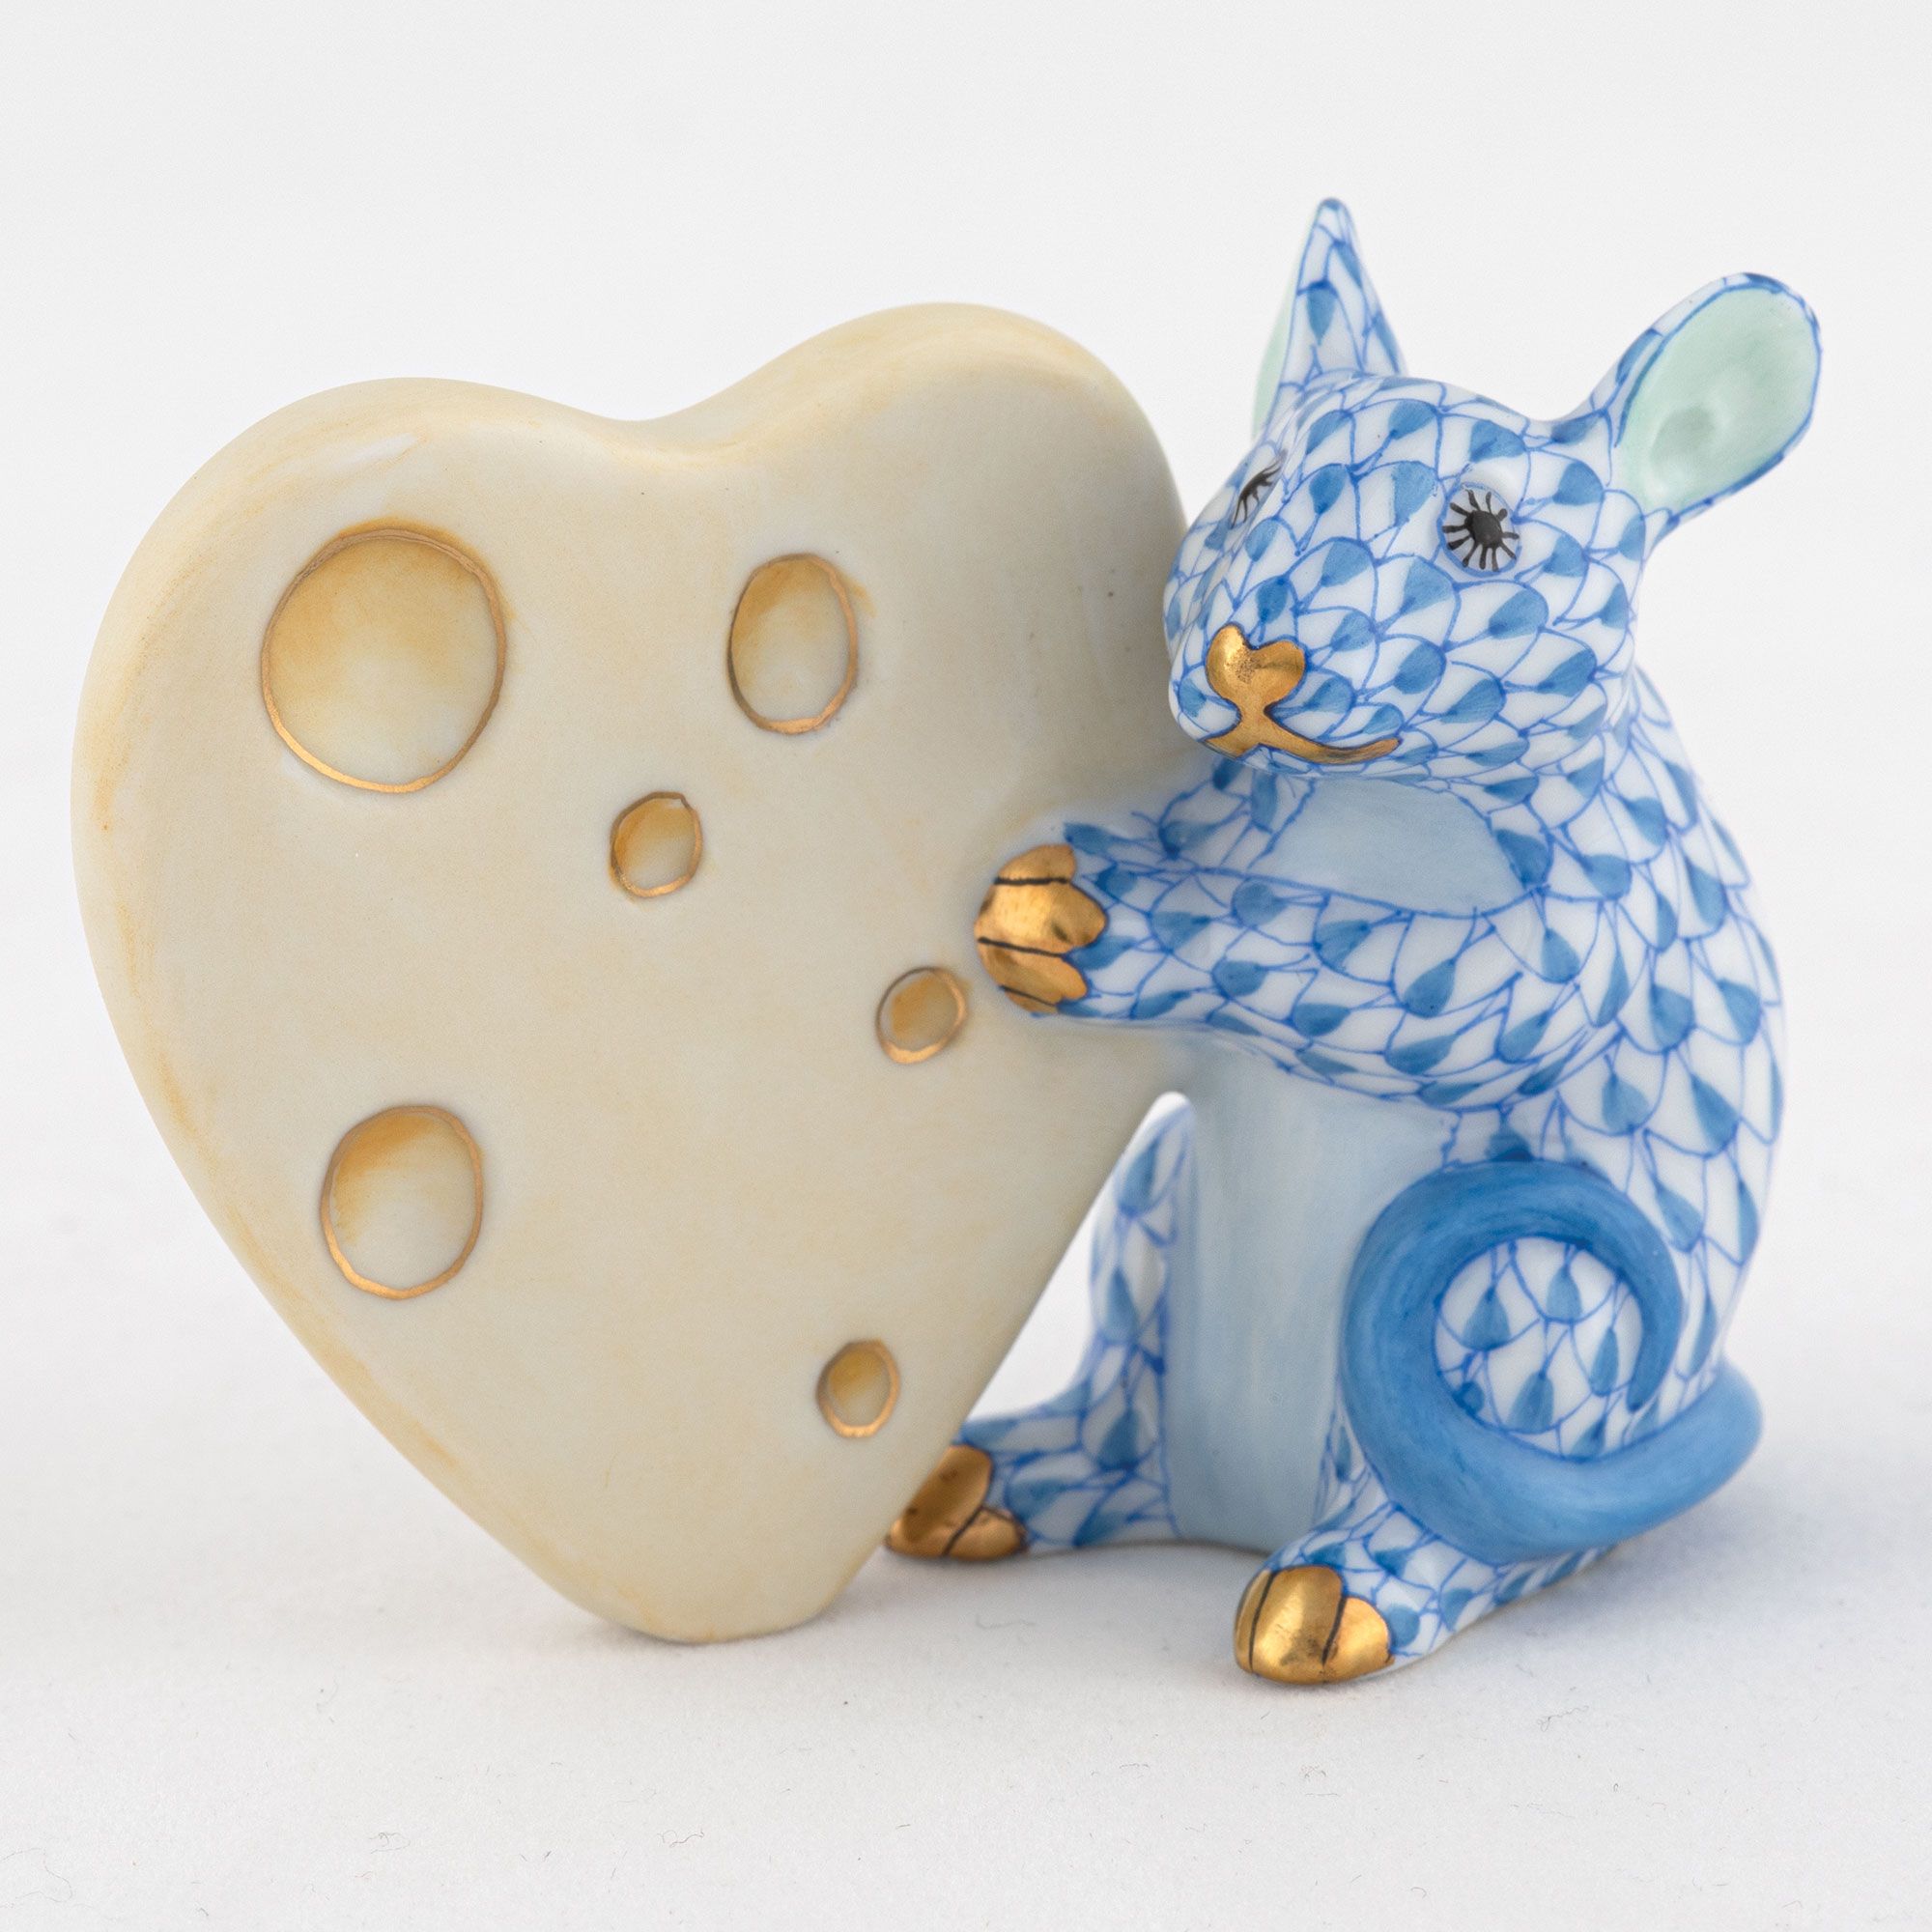 Blue Mouse with Heart Shaped Cheese